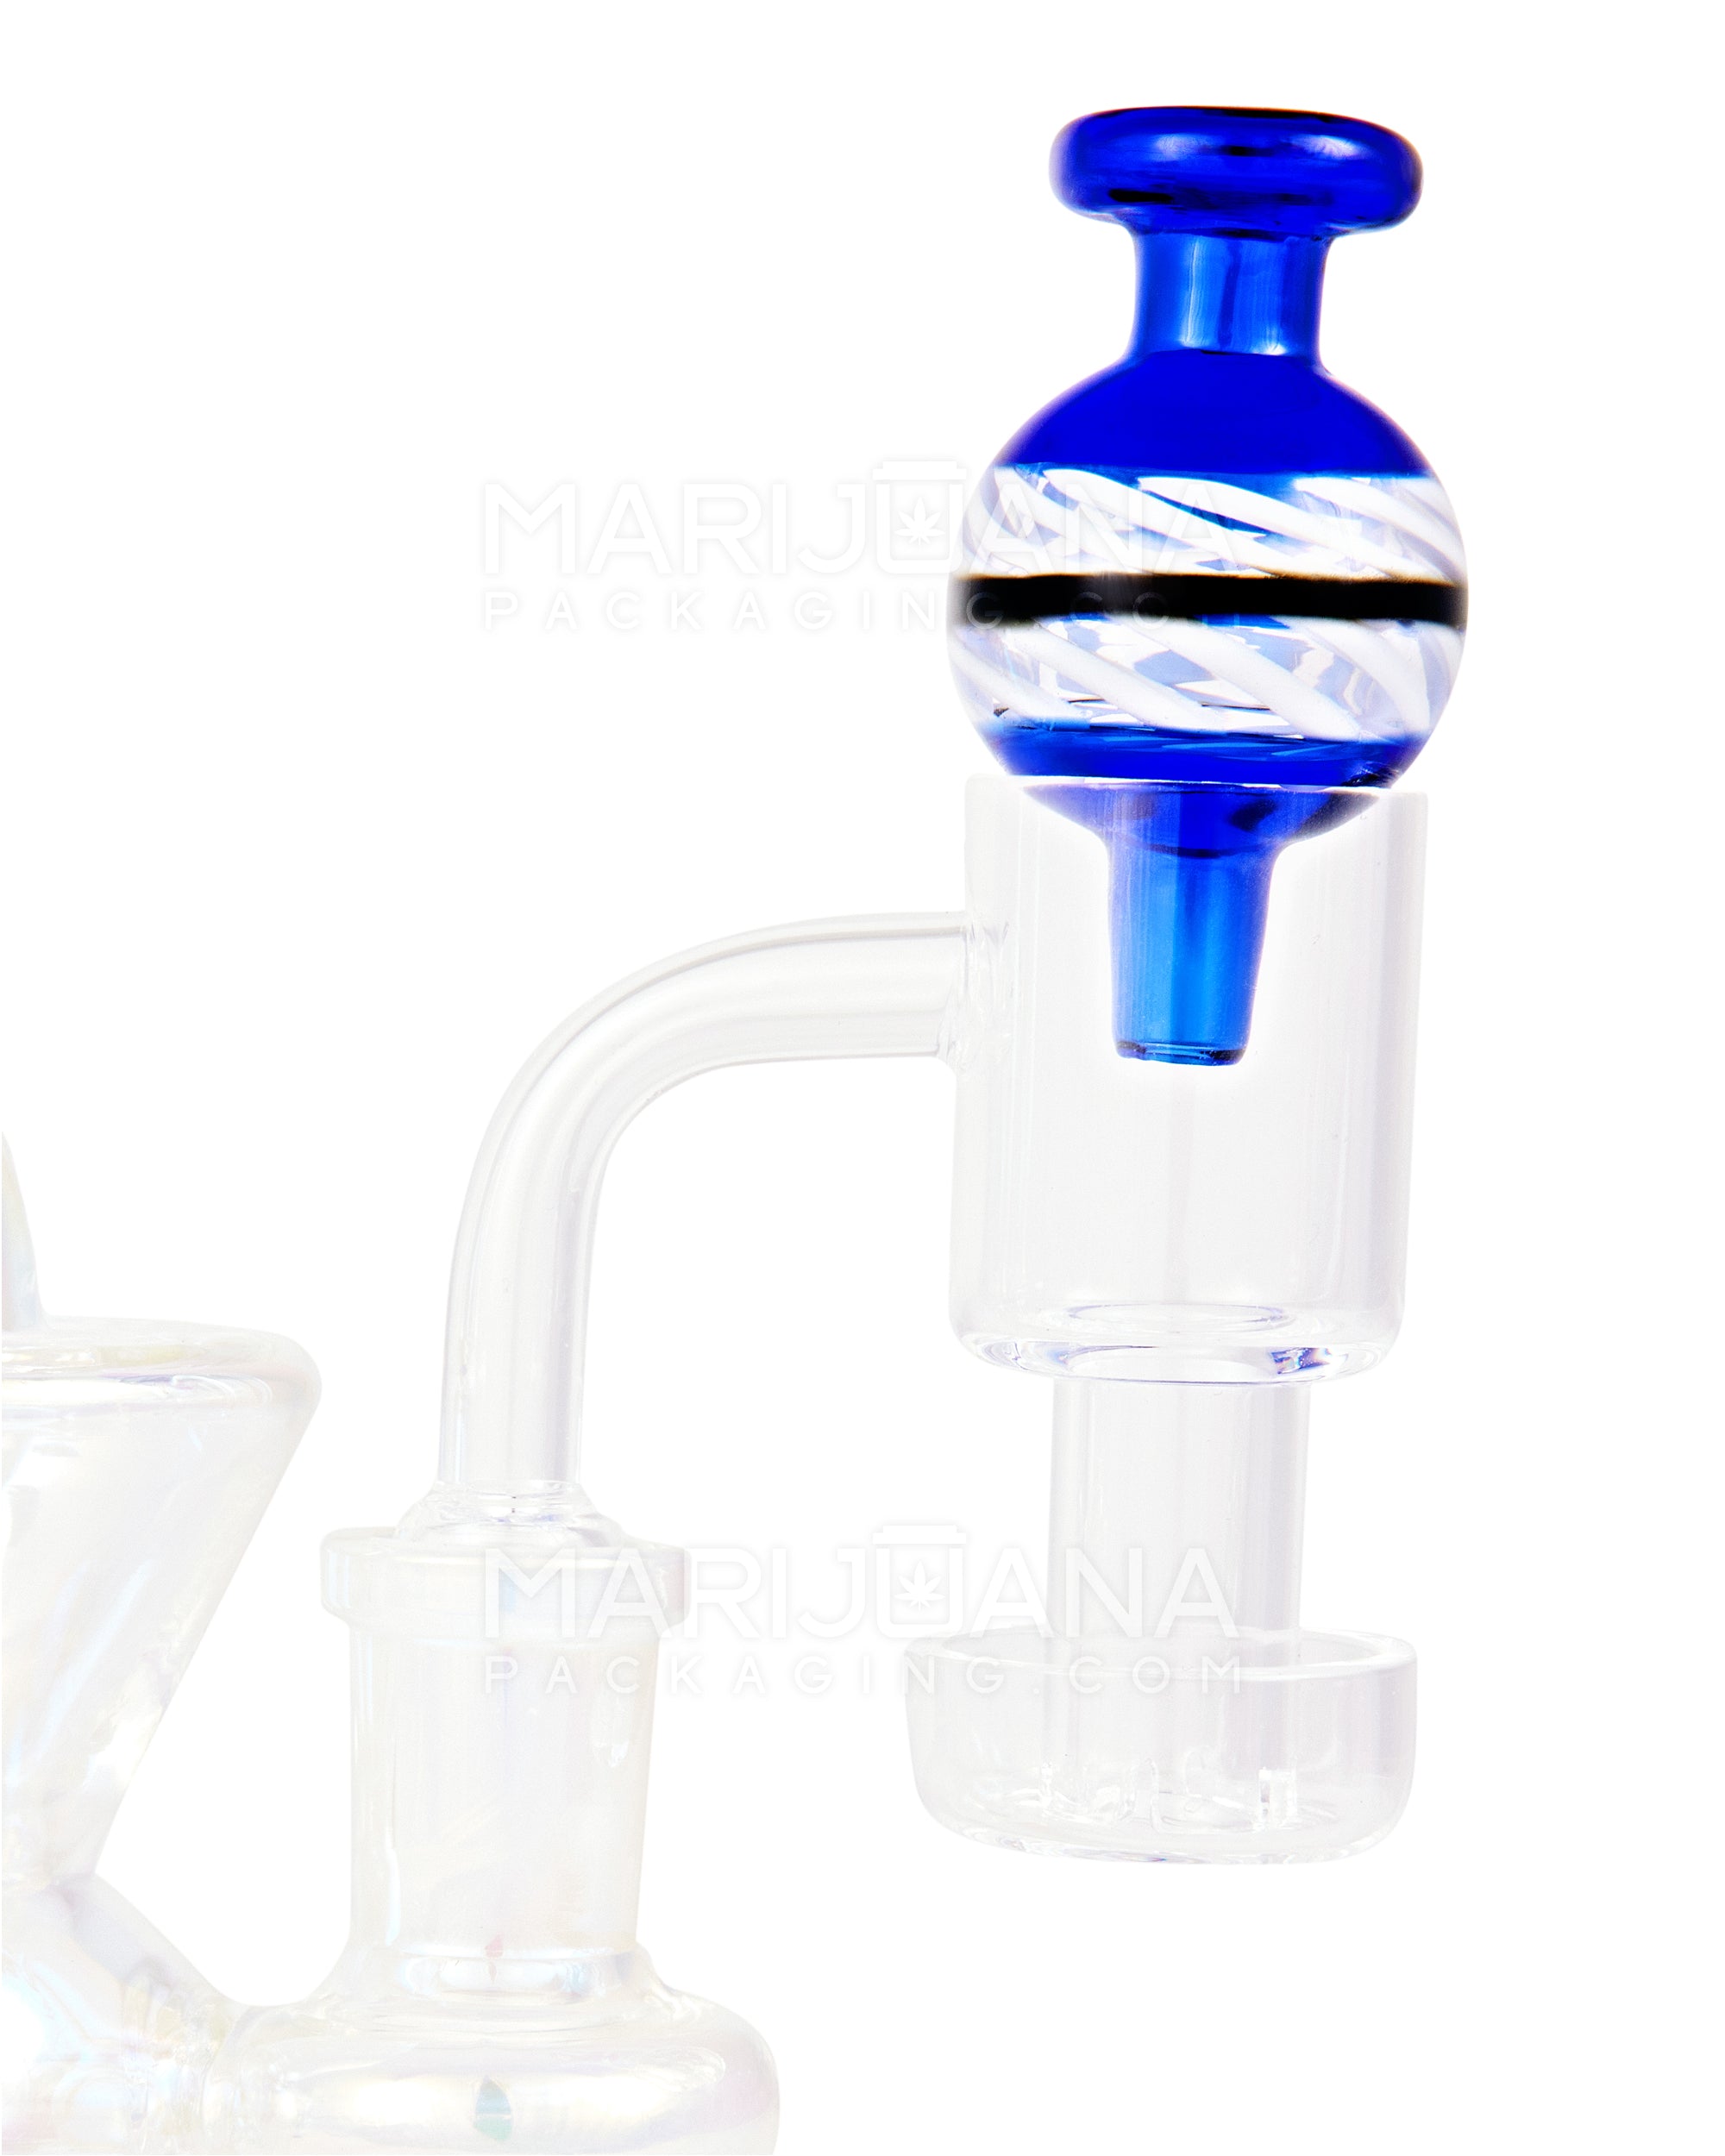 Striped & Swirl Bubble Carb Cap | 30mm - Glass - Assorted - 10